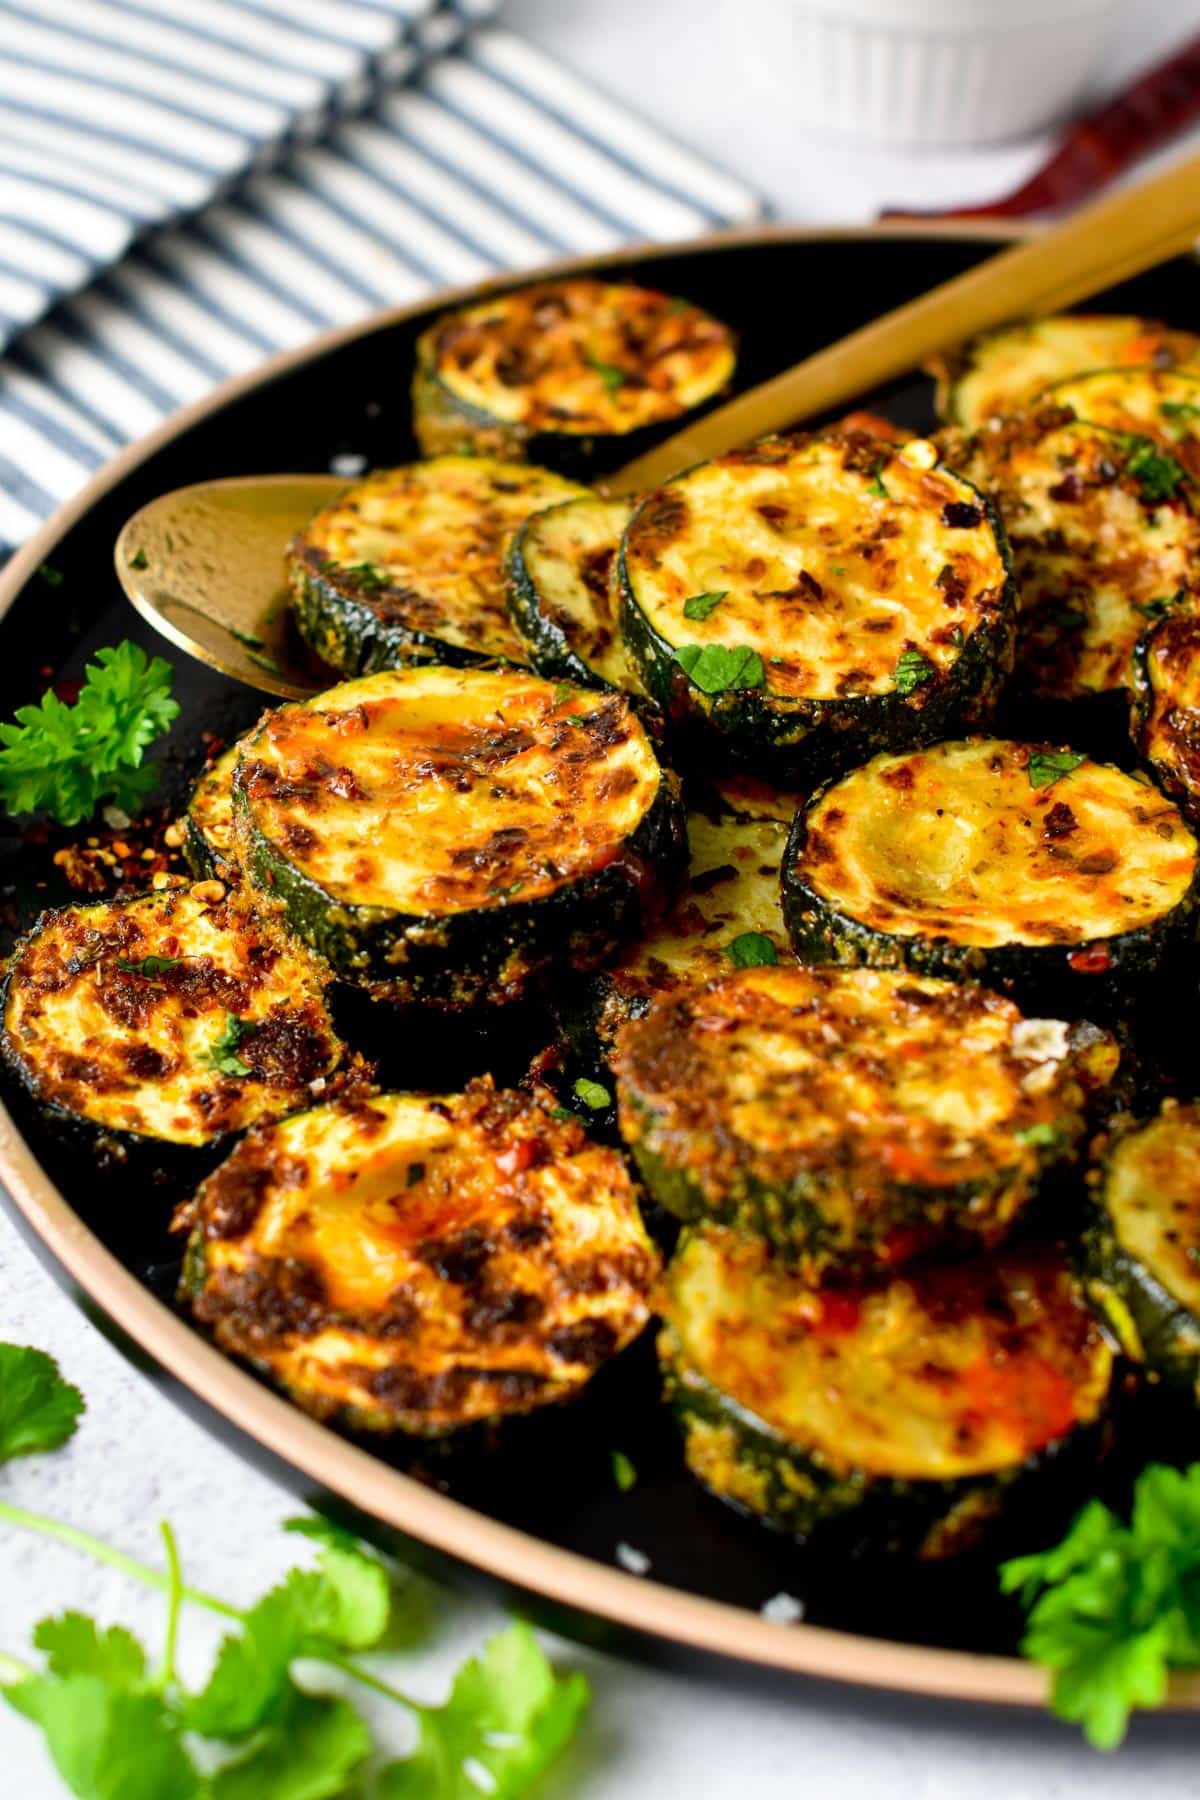 These Roasted Zucchini recipe is the most easy side dish recipe ever packed with summer flavors. Plus, it's low-carb, vegan and gluten-free so all the family can enjoy it.